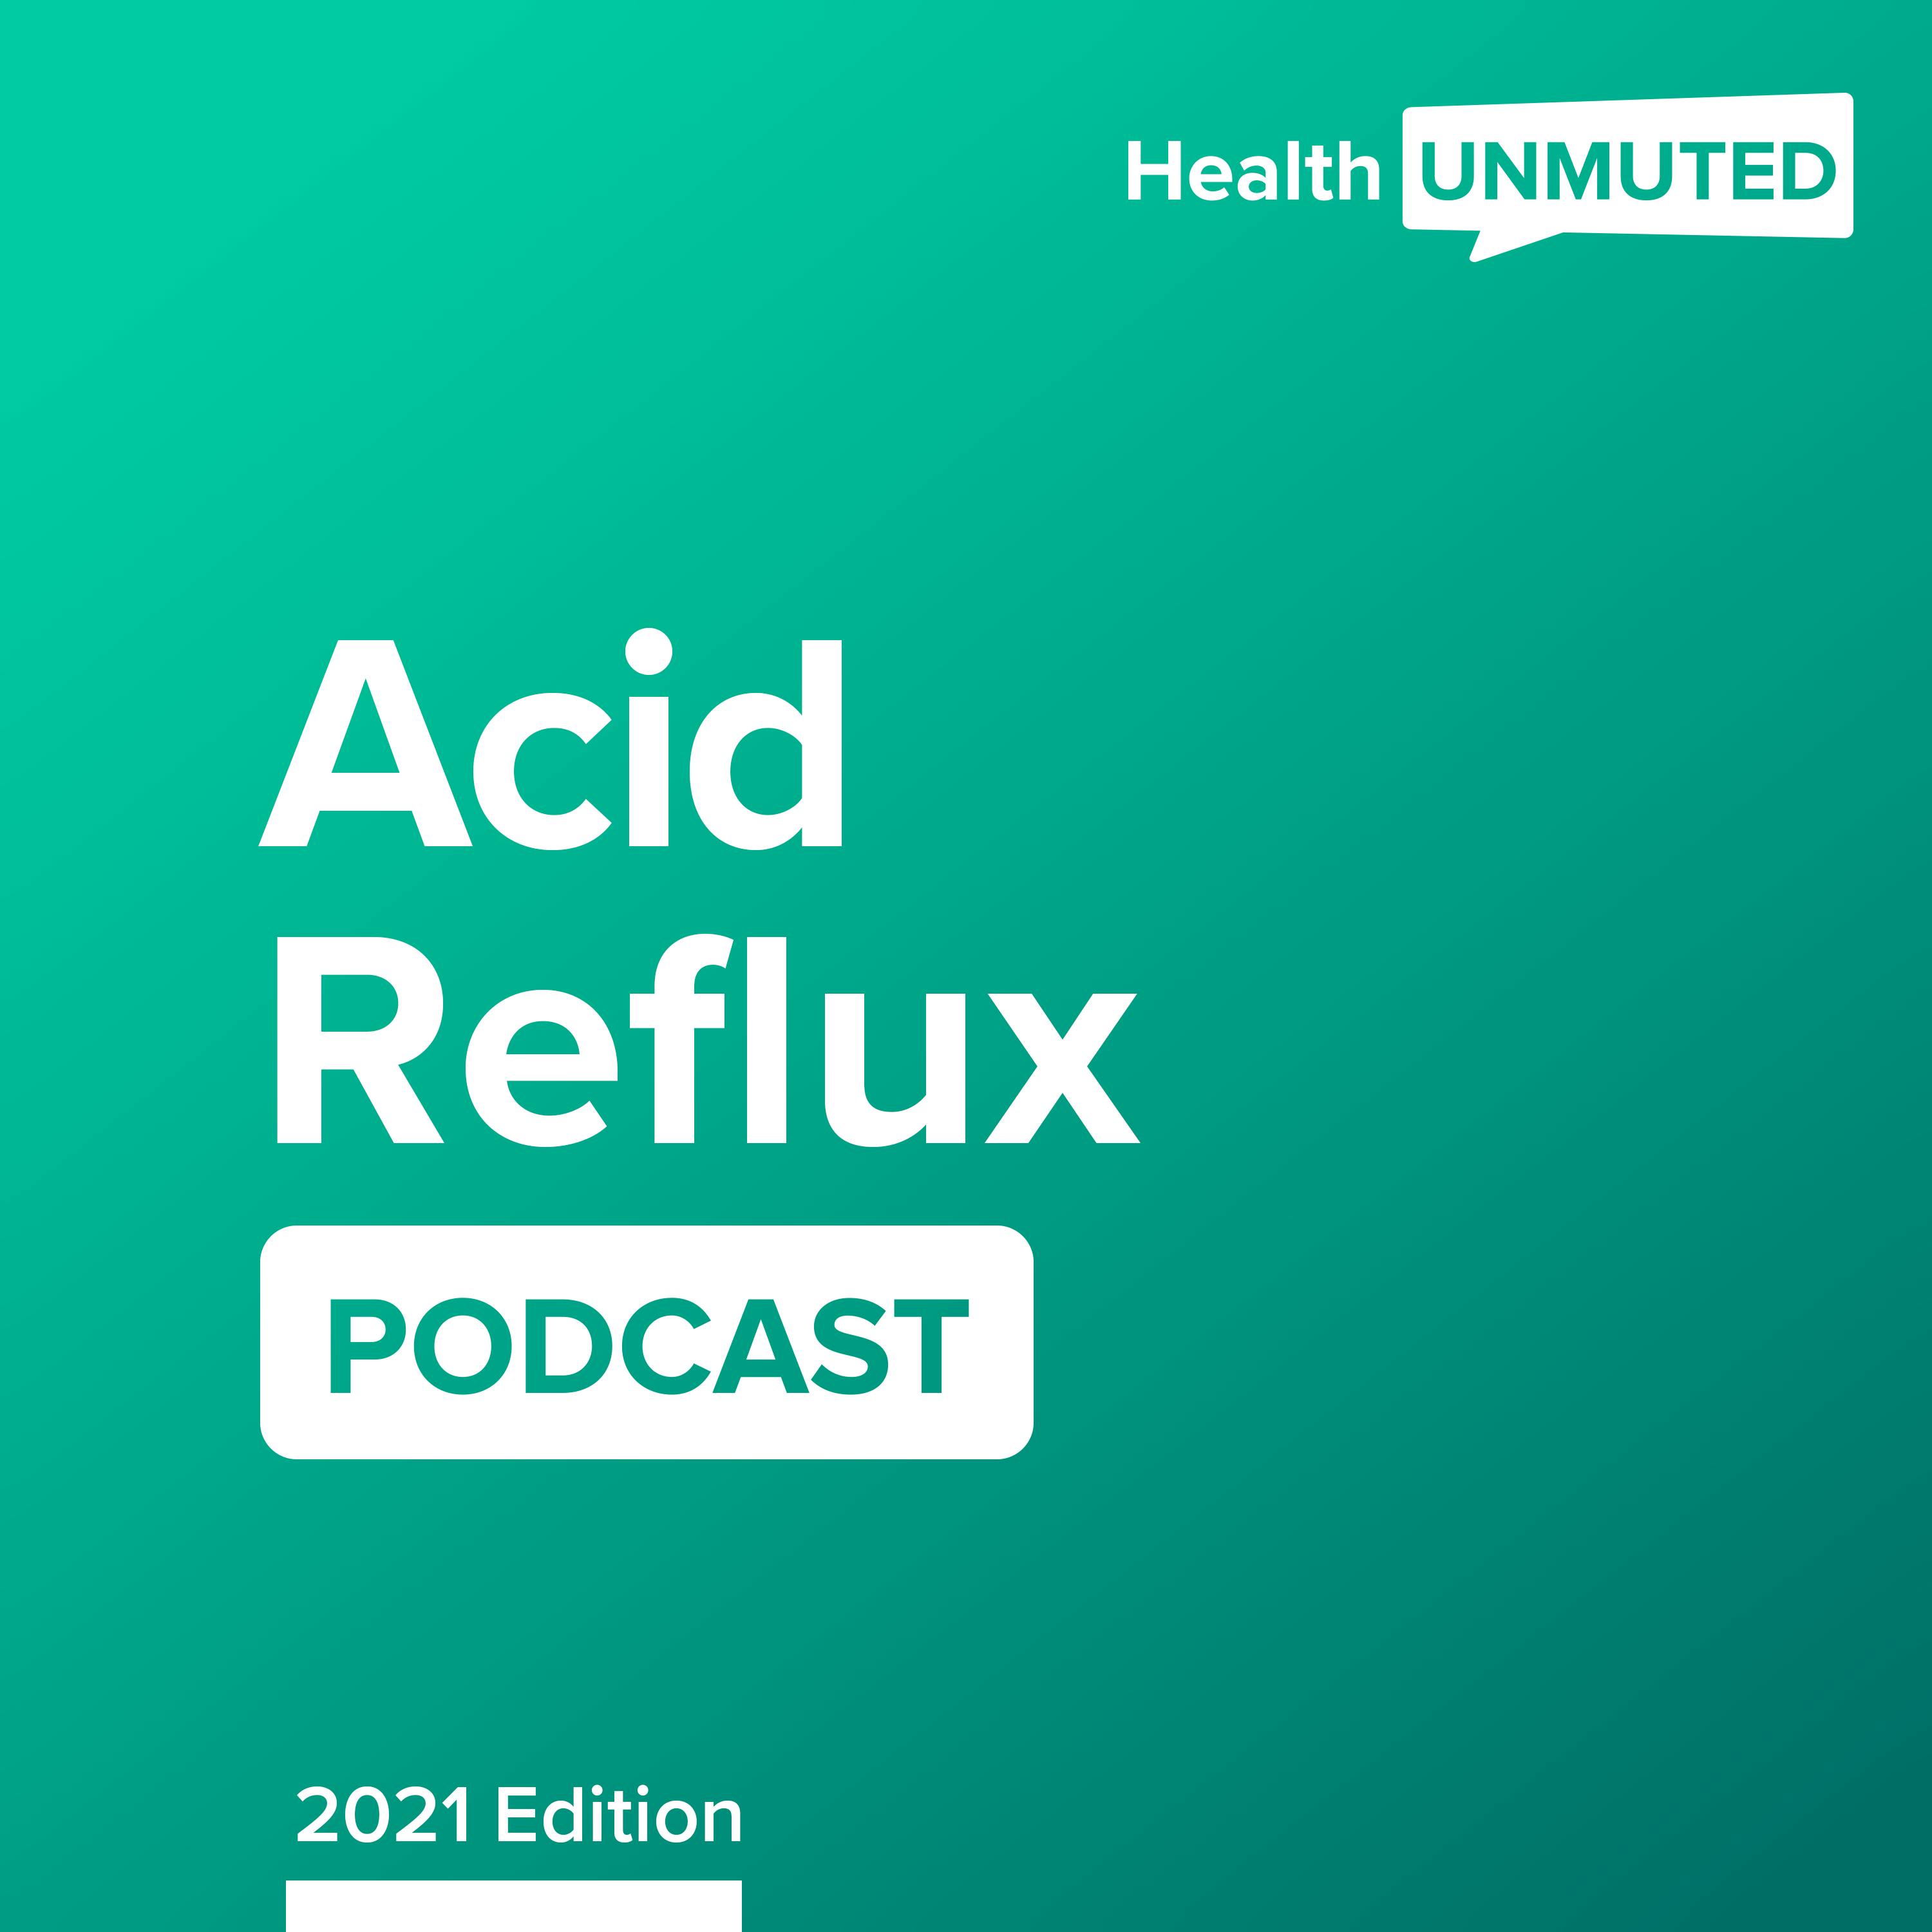 Welcome to the Acid Reflux Podcast